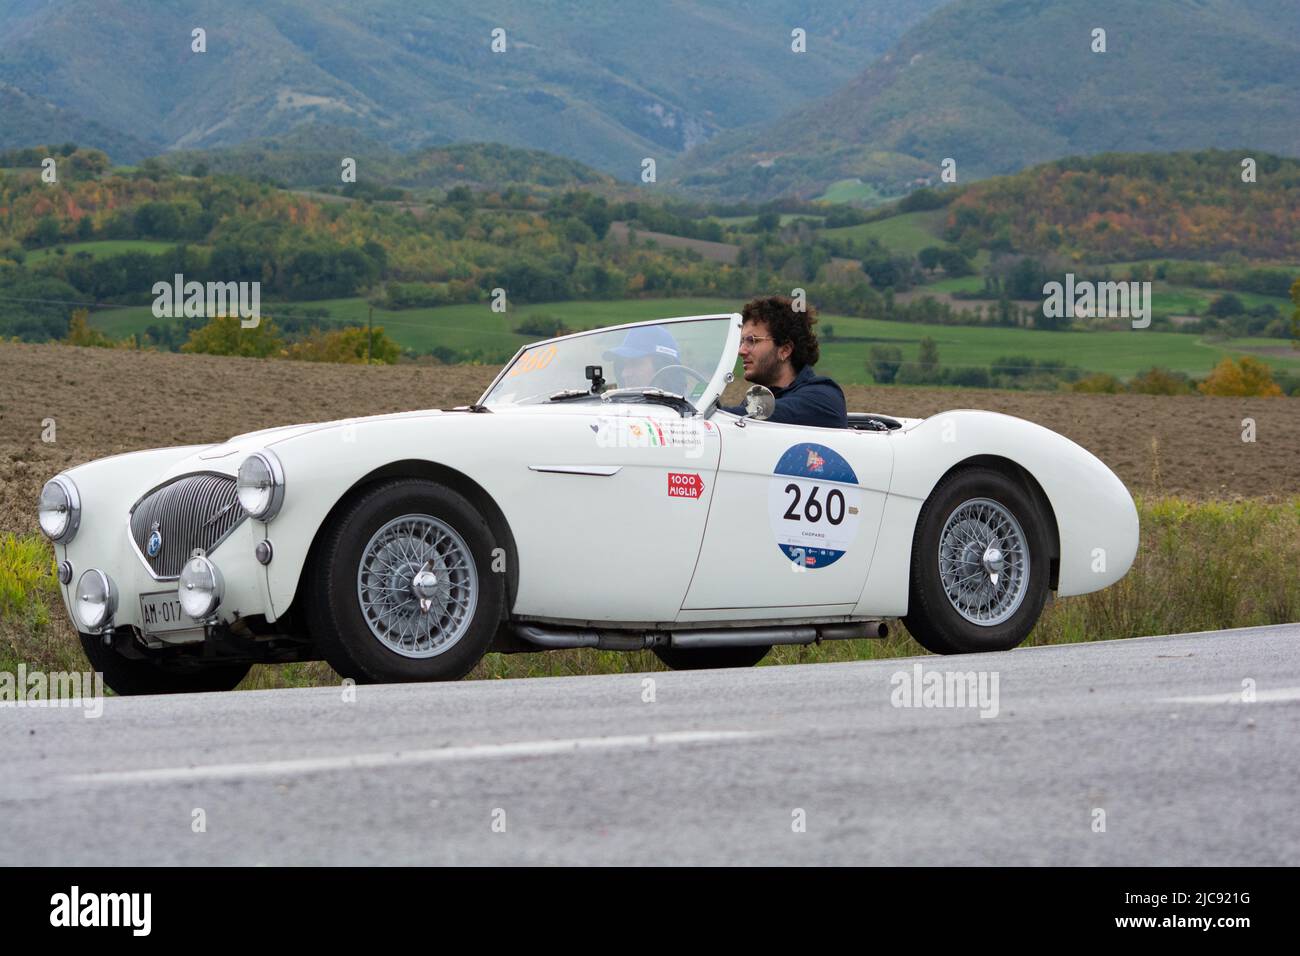 CAGLI , ITALY - OTT 24 - 2020 : AUSTIN HEALEY 100/4 BN1 1954 on an old racing car in rally Mille Miglia 2020 the famous italian historical race (1927- Stock Photo